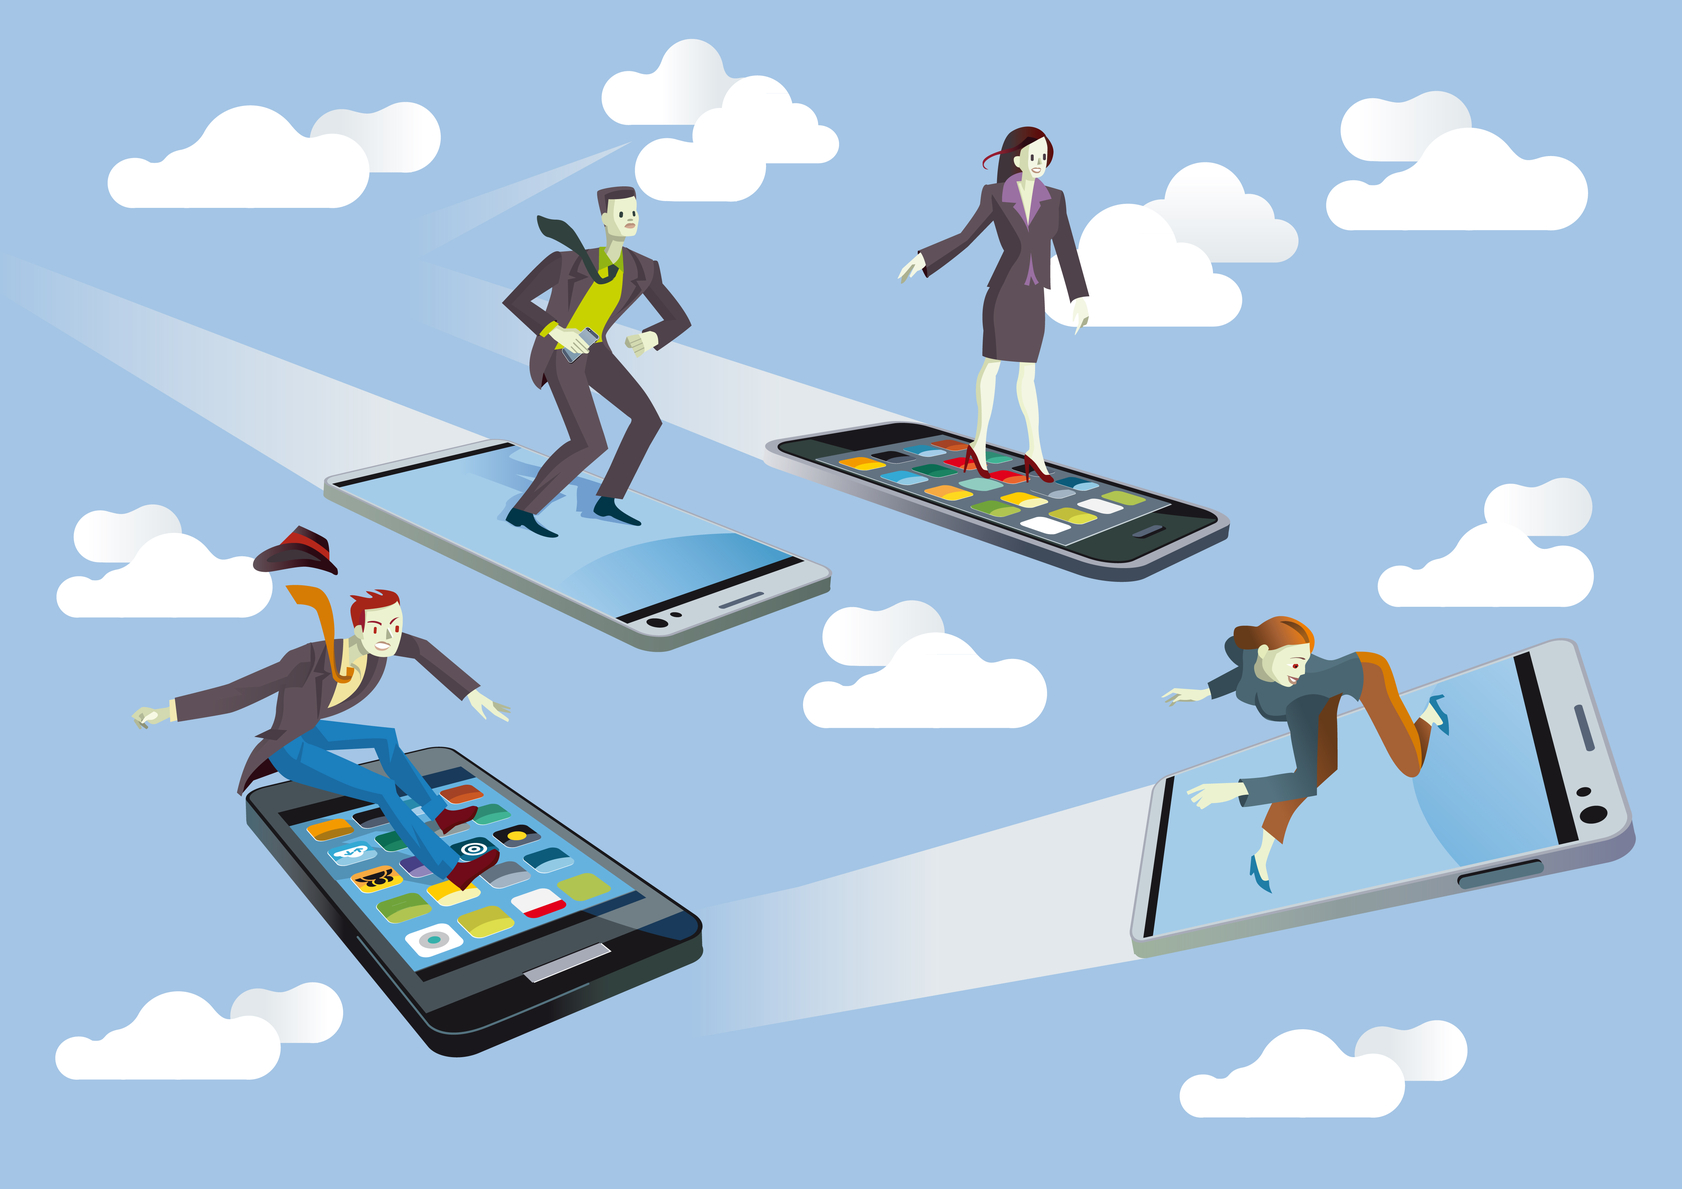 Business people with Flying smartphones